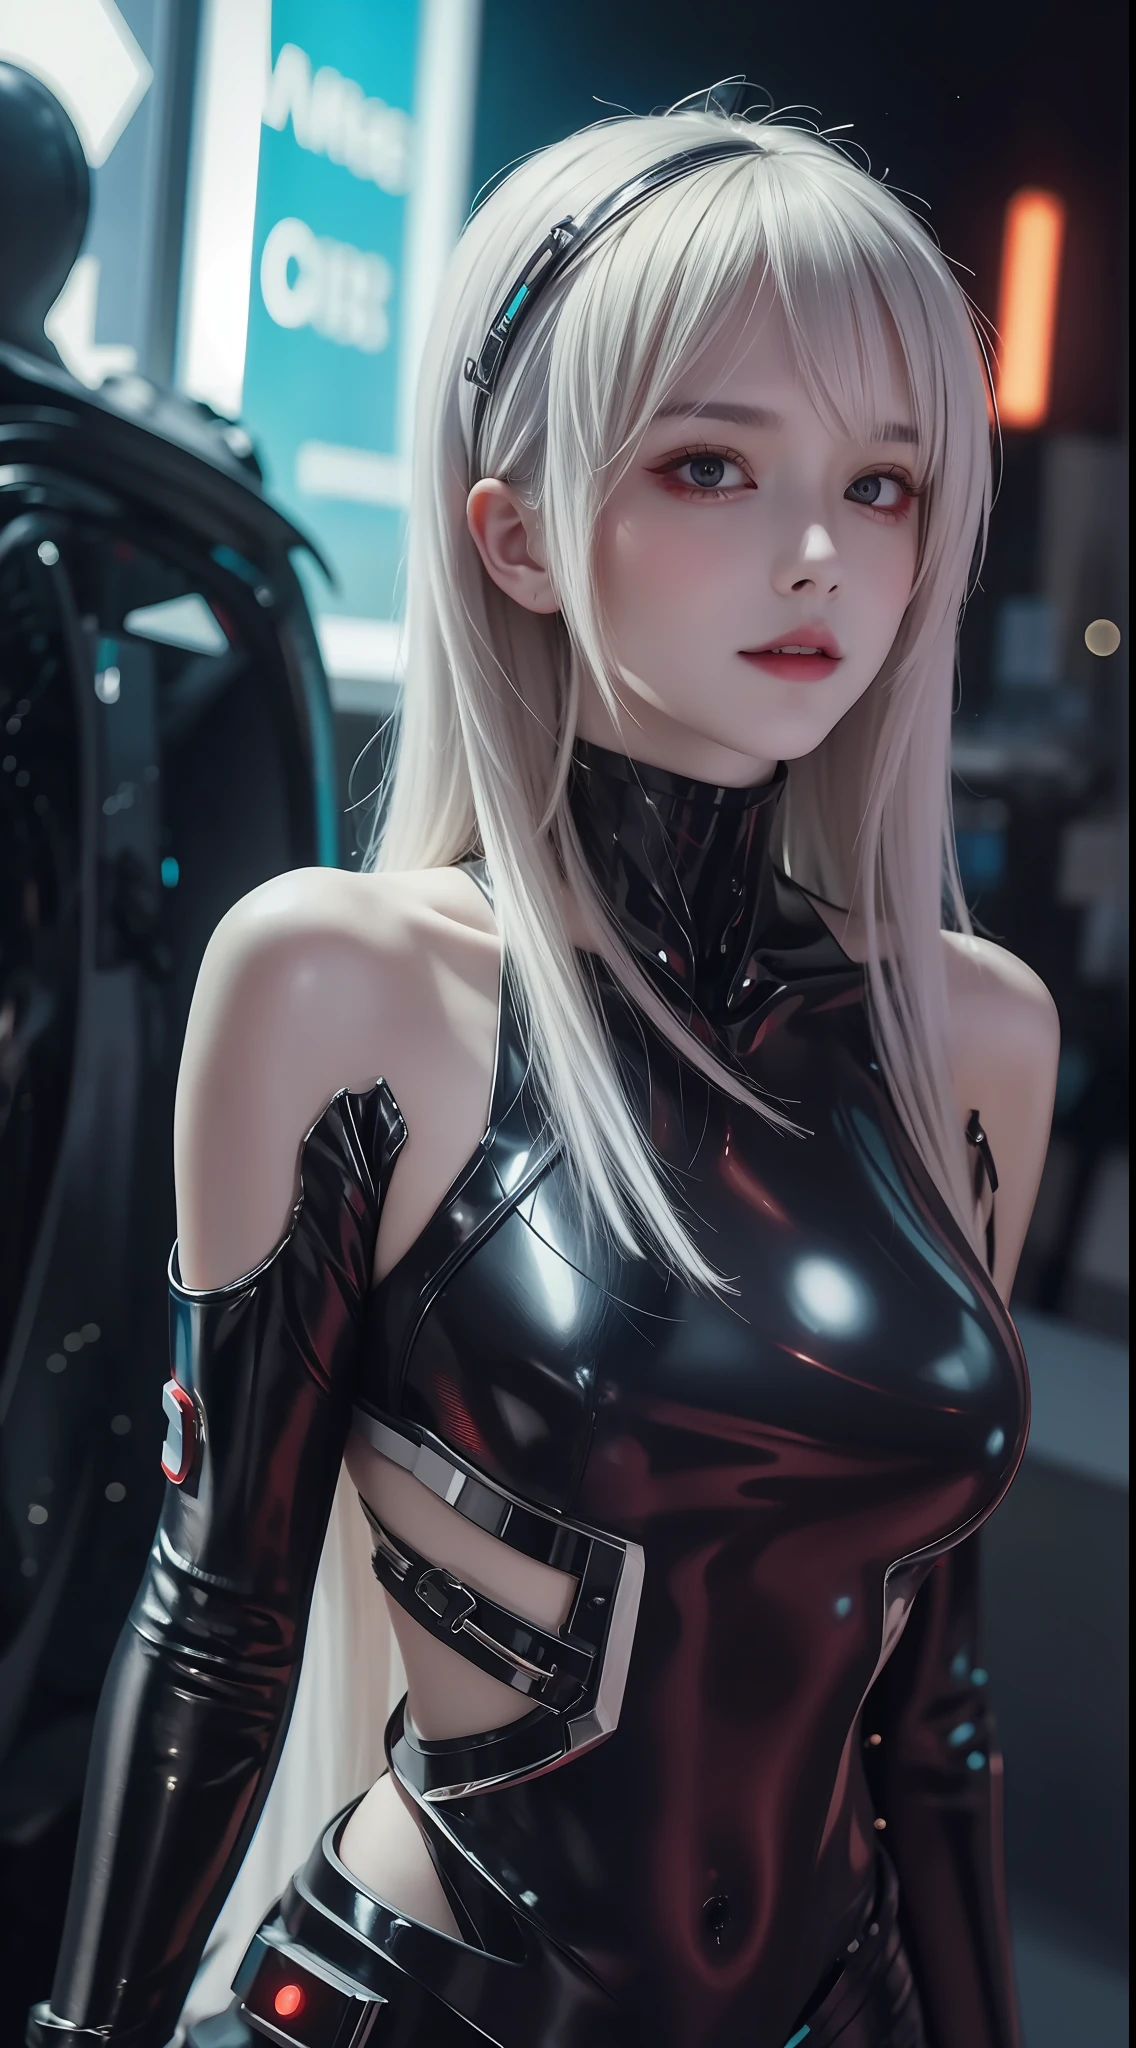 8K uhd, materpiece, a beautiful girl, detaild eye, good face, detaild eyebrow, cyberpunk outfit, white outfit, cyberpunk, Cyberspace, cyberpunk shining background, neon effect, Spreading lighting, red lighting, whole body capture, full image,